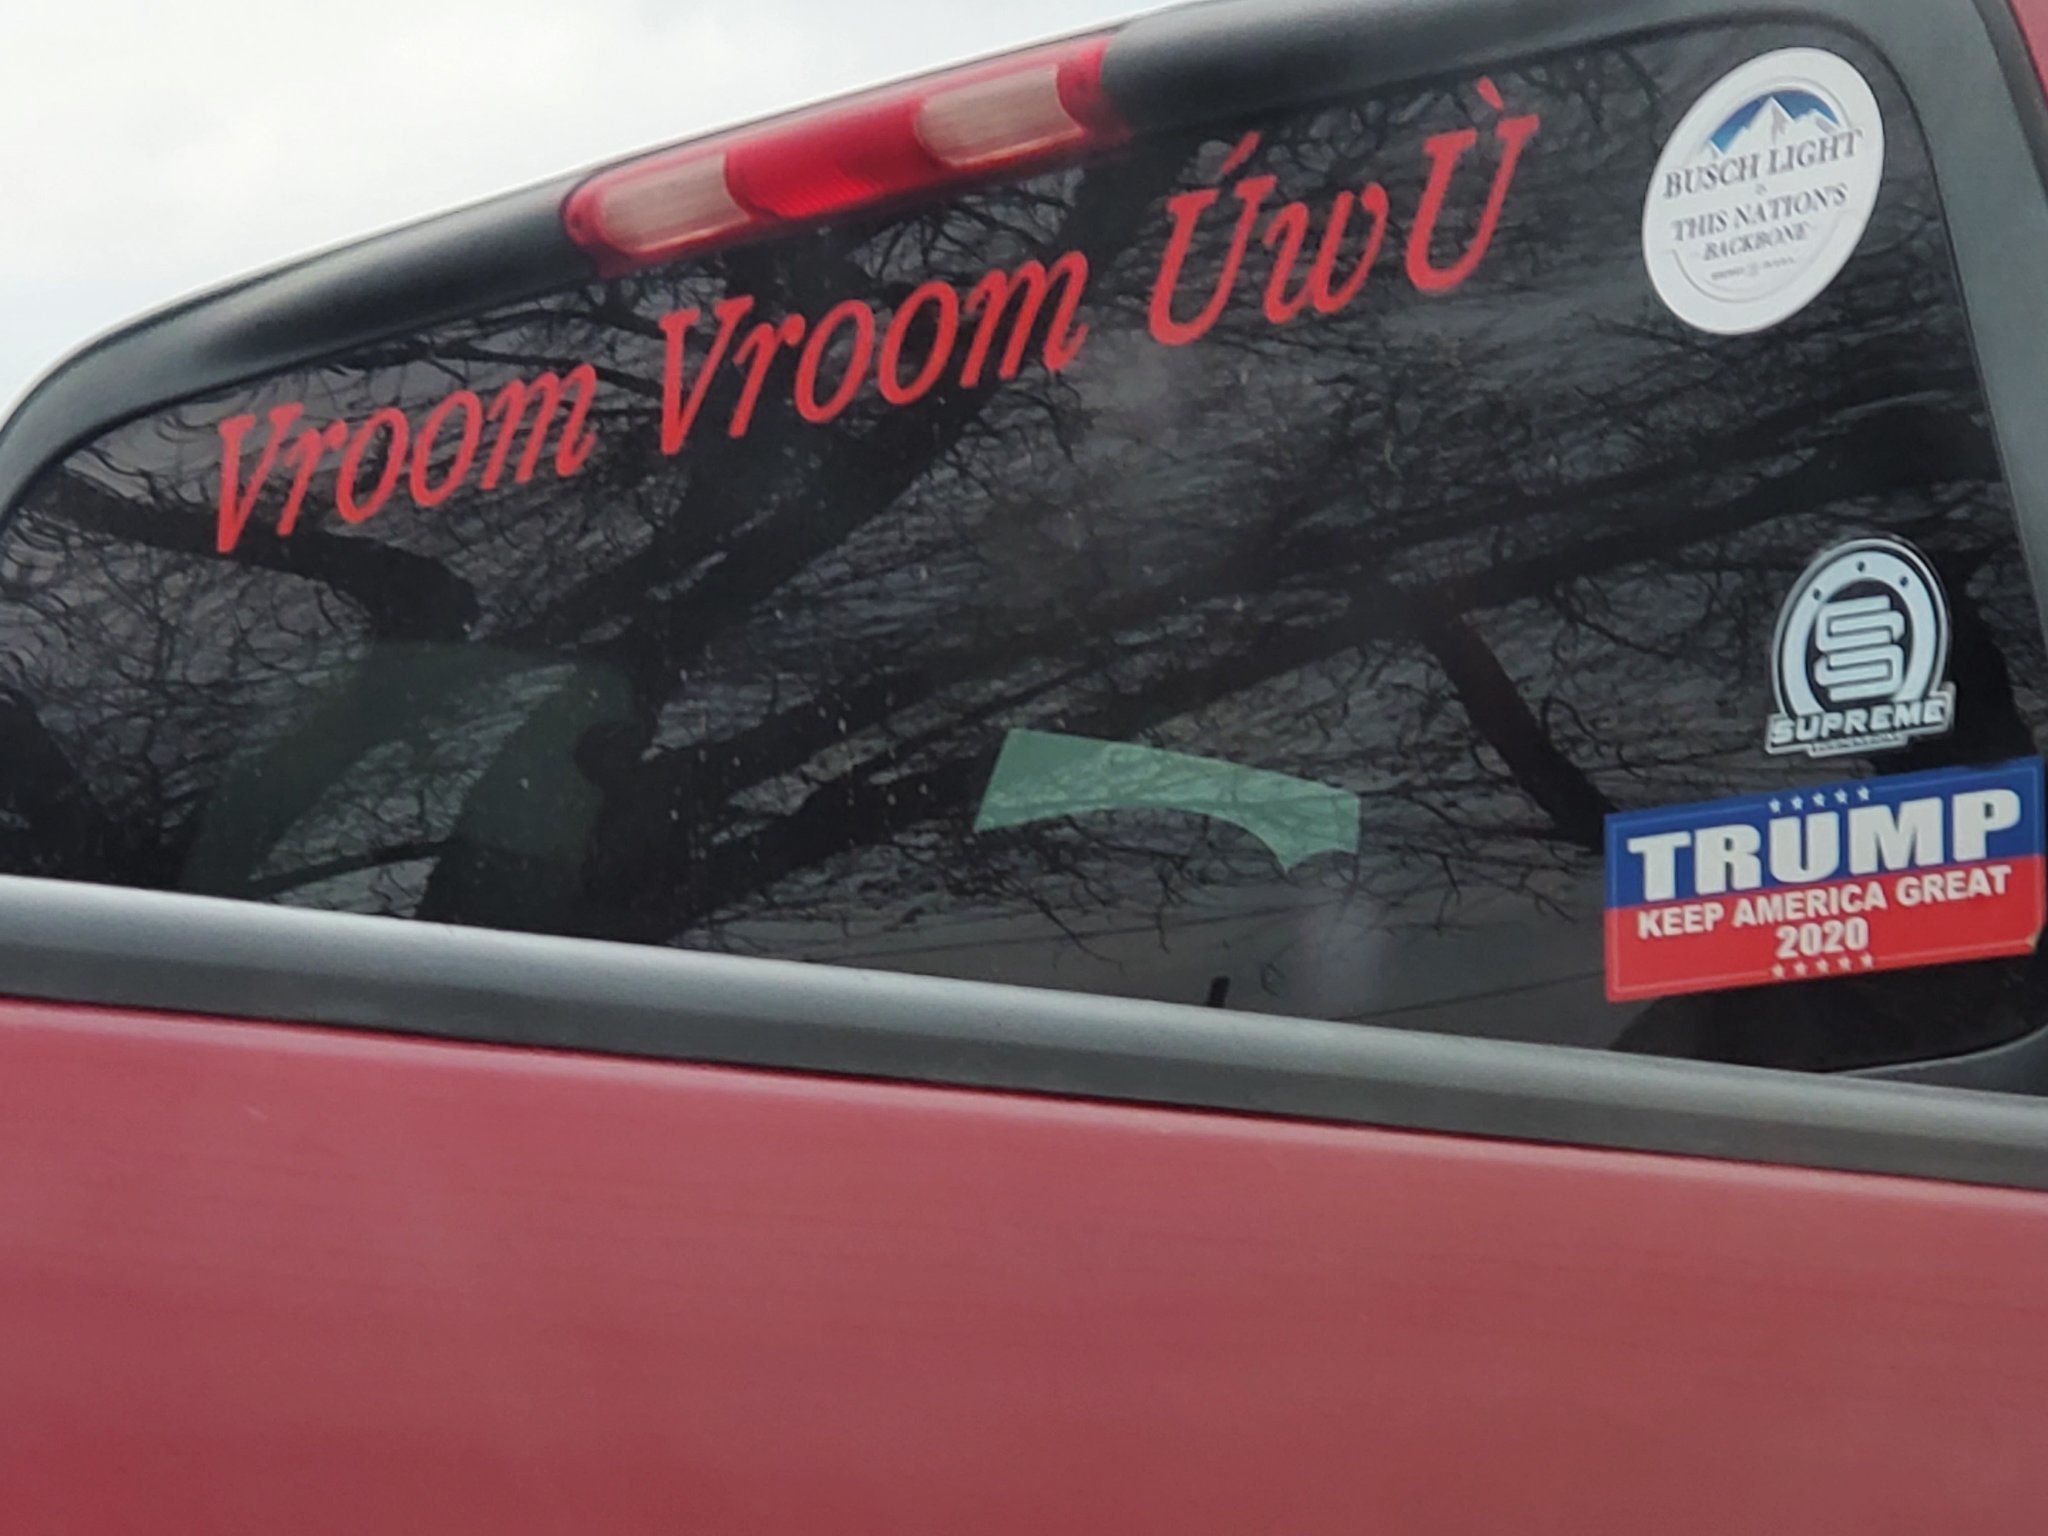 Just an interesting truck I found parked next to me... - meme